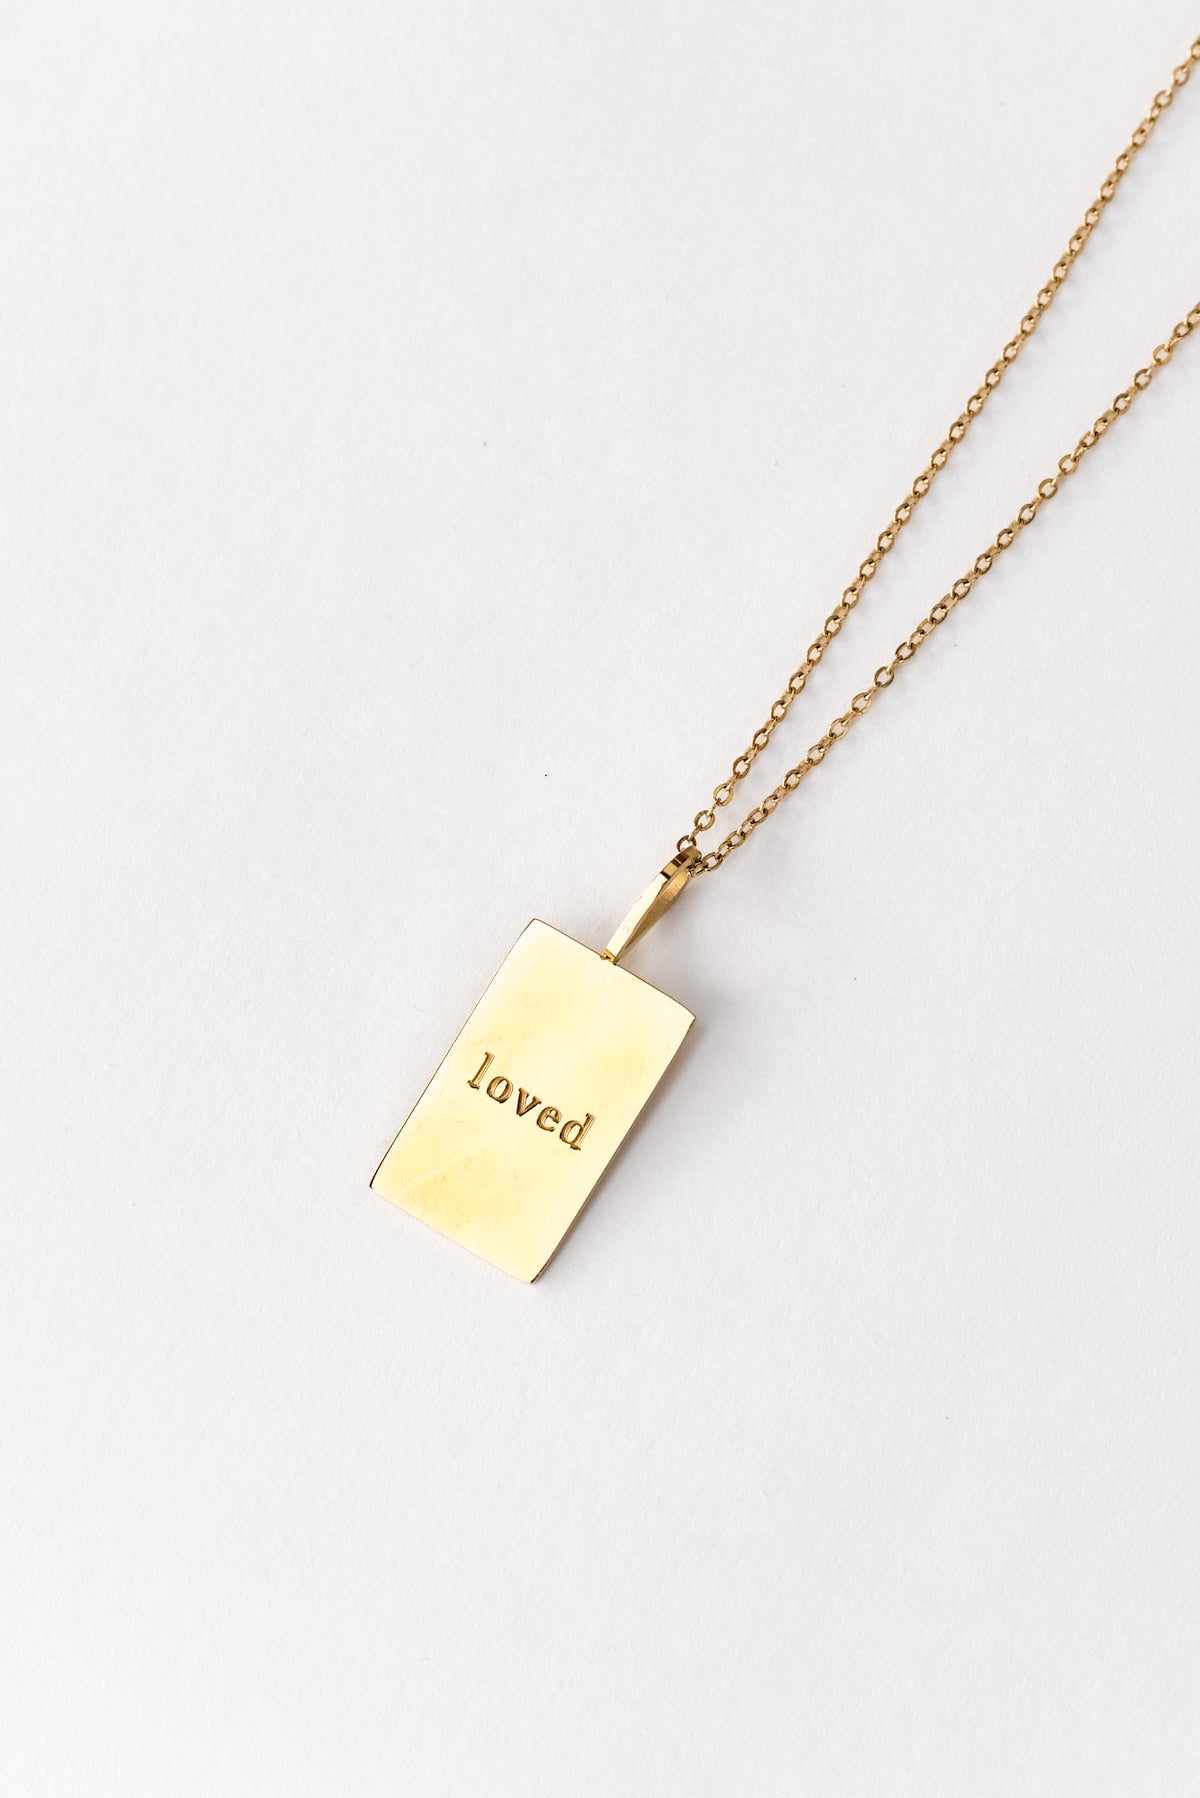 AMOR DEUS What's love necklace "Loved" Variation on a white backdrop